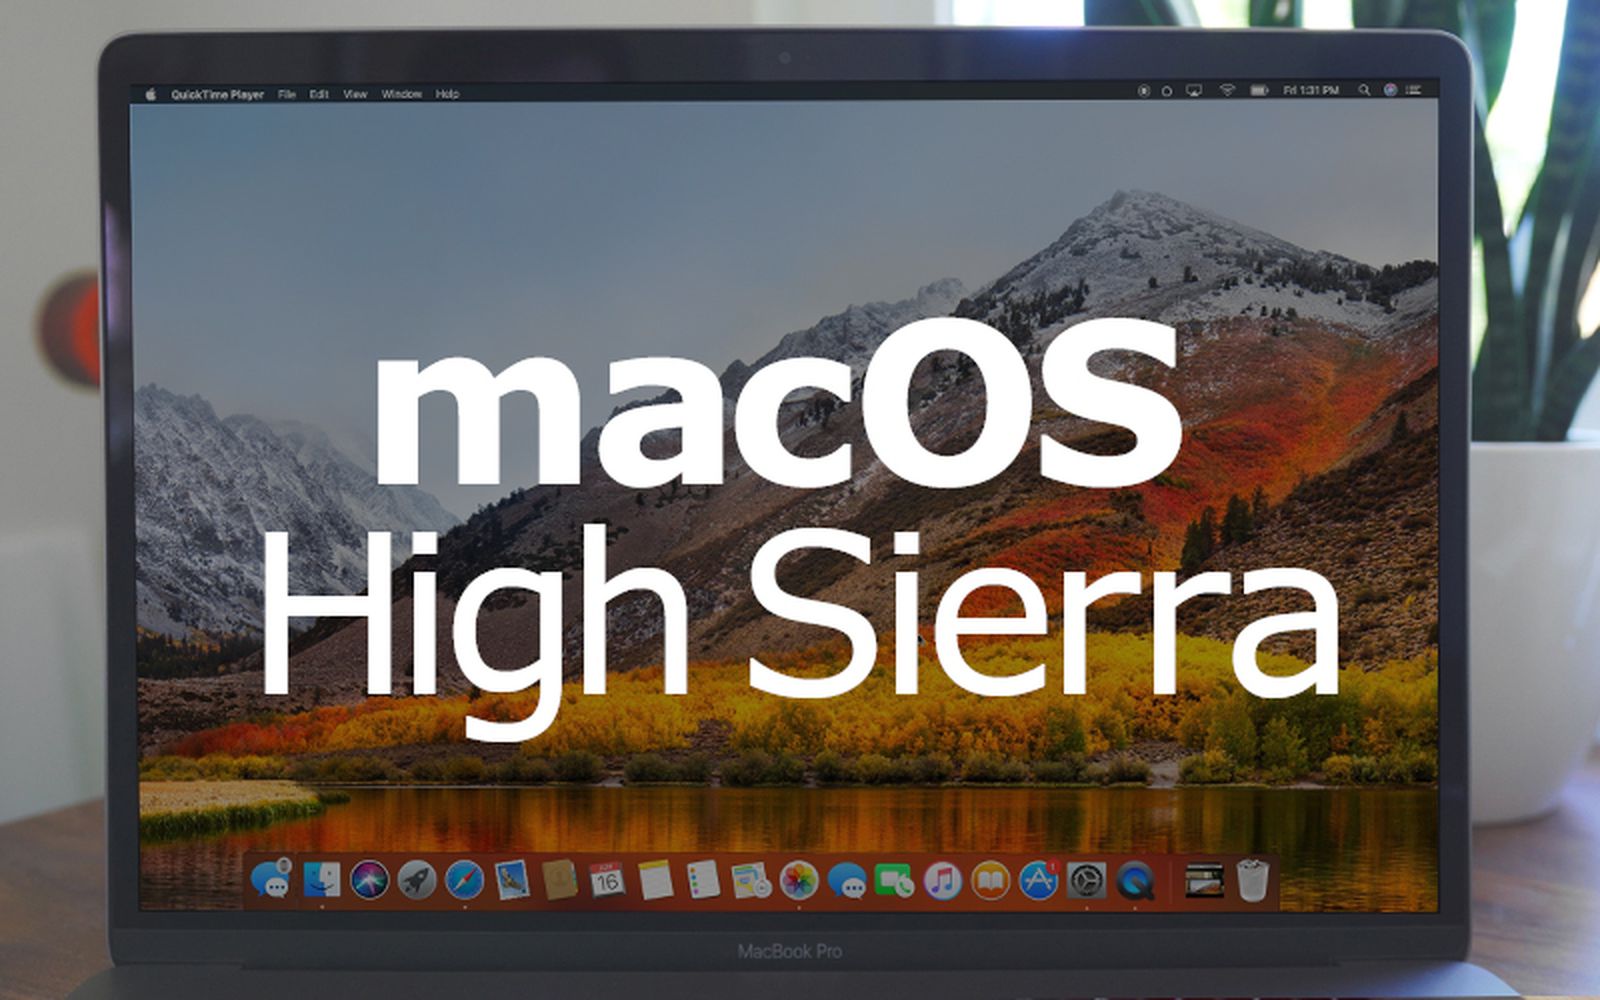 sierra for the mac book pro